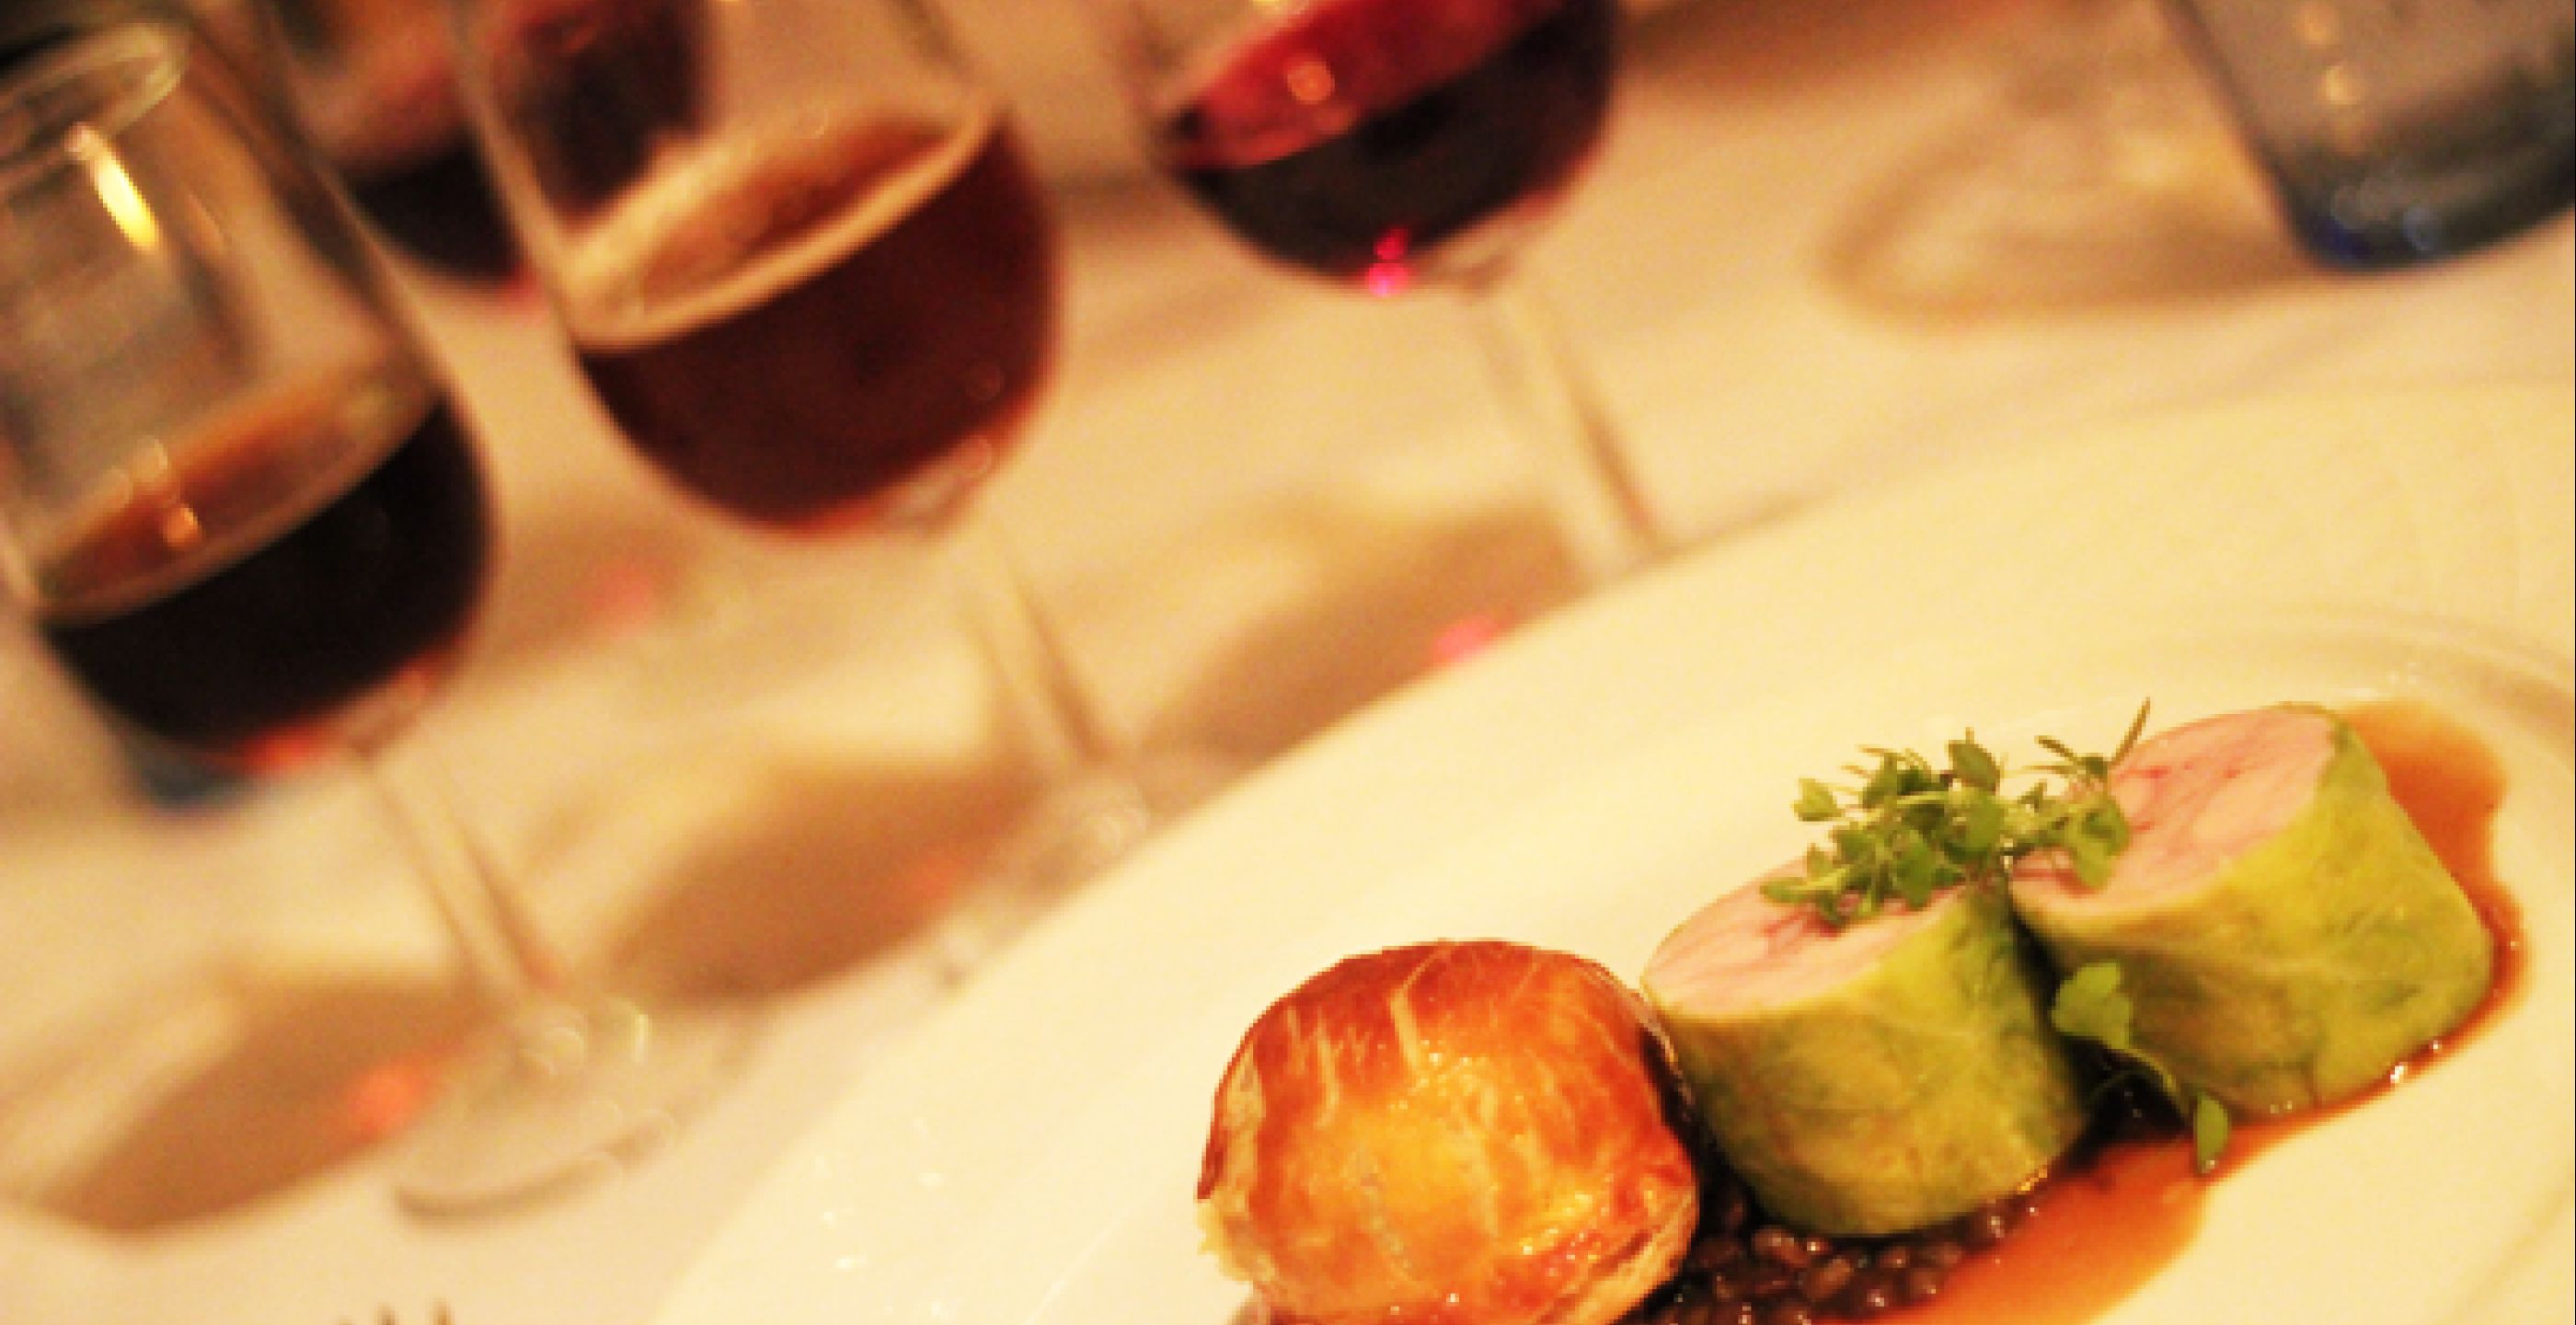 Beer &amp; Food: Beer vs Wine Dinner at The Courthouse